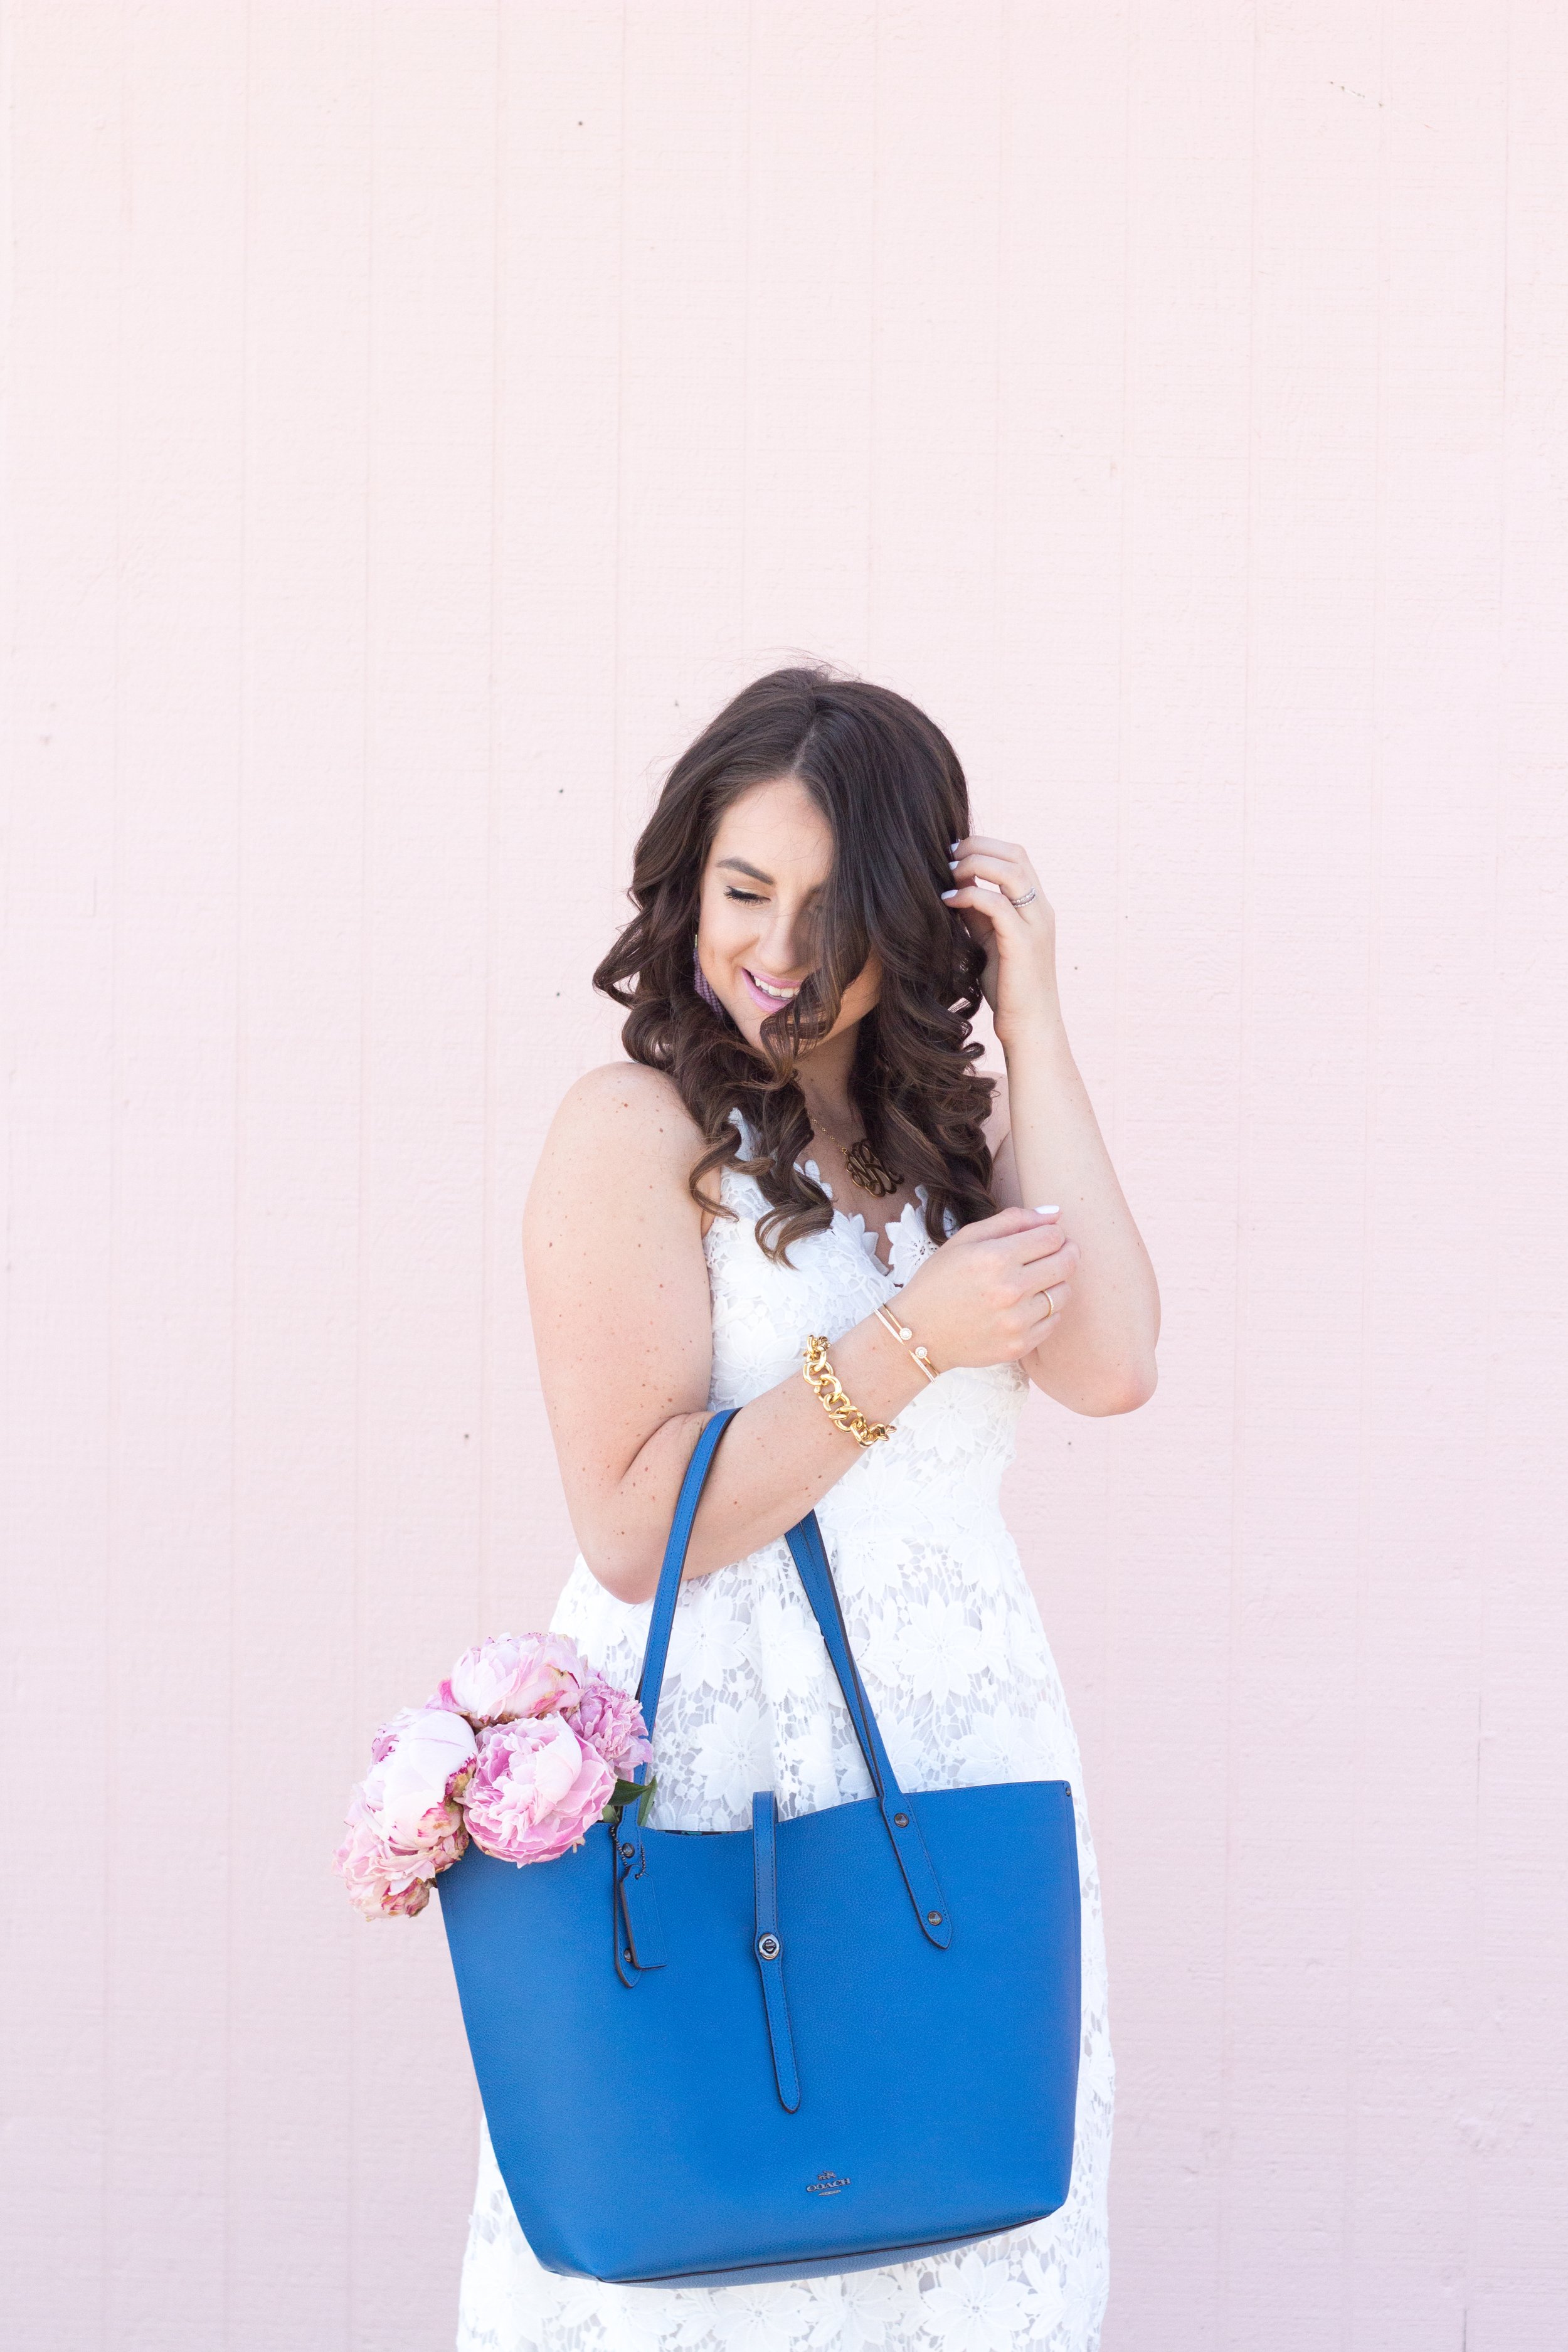 Classic style for Summer in this white dress and blue coach bag for inspiration.